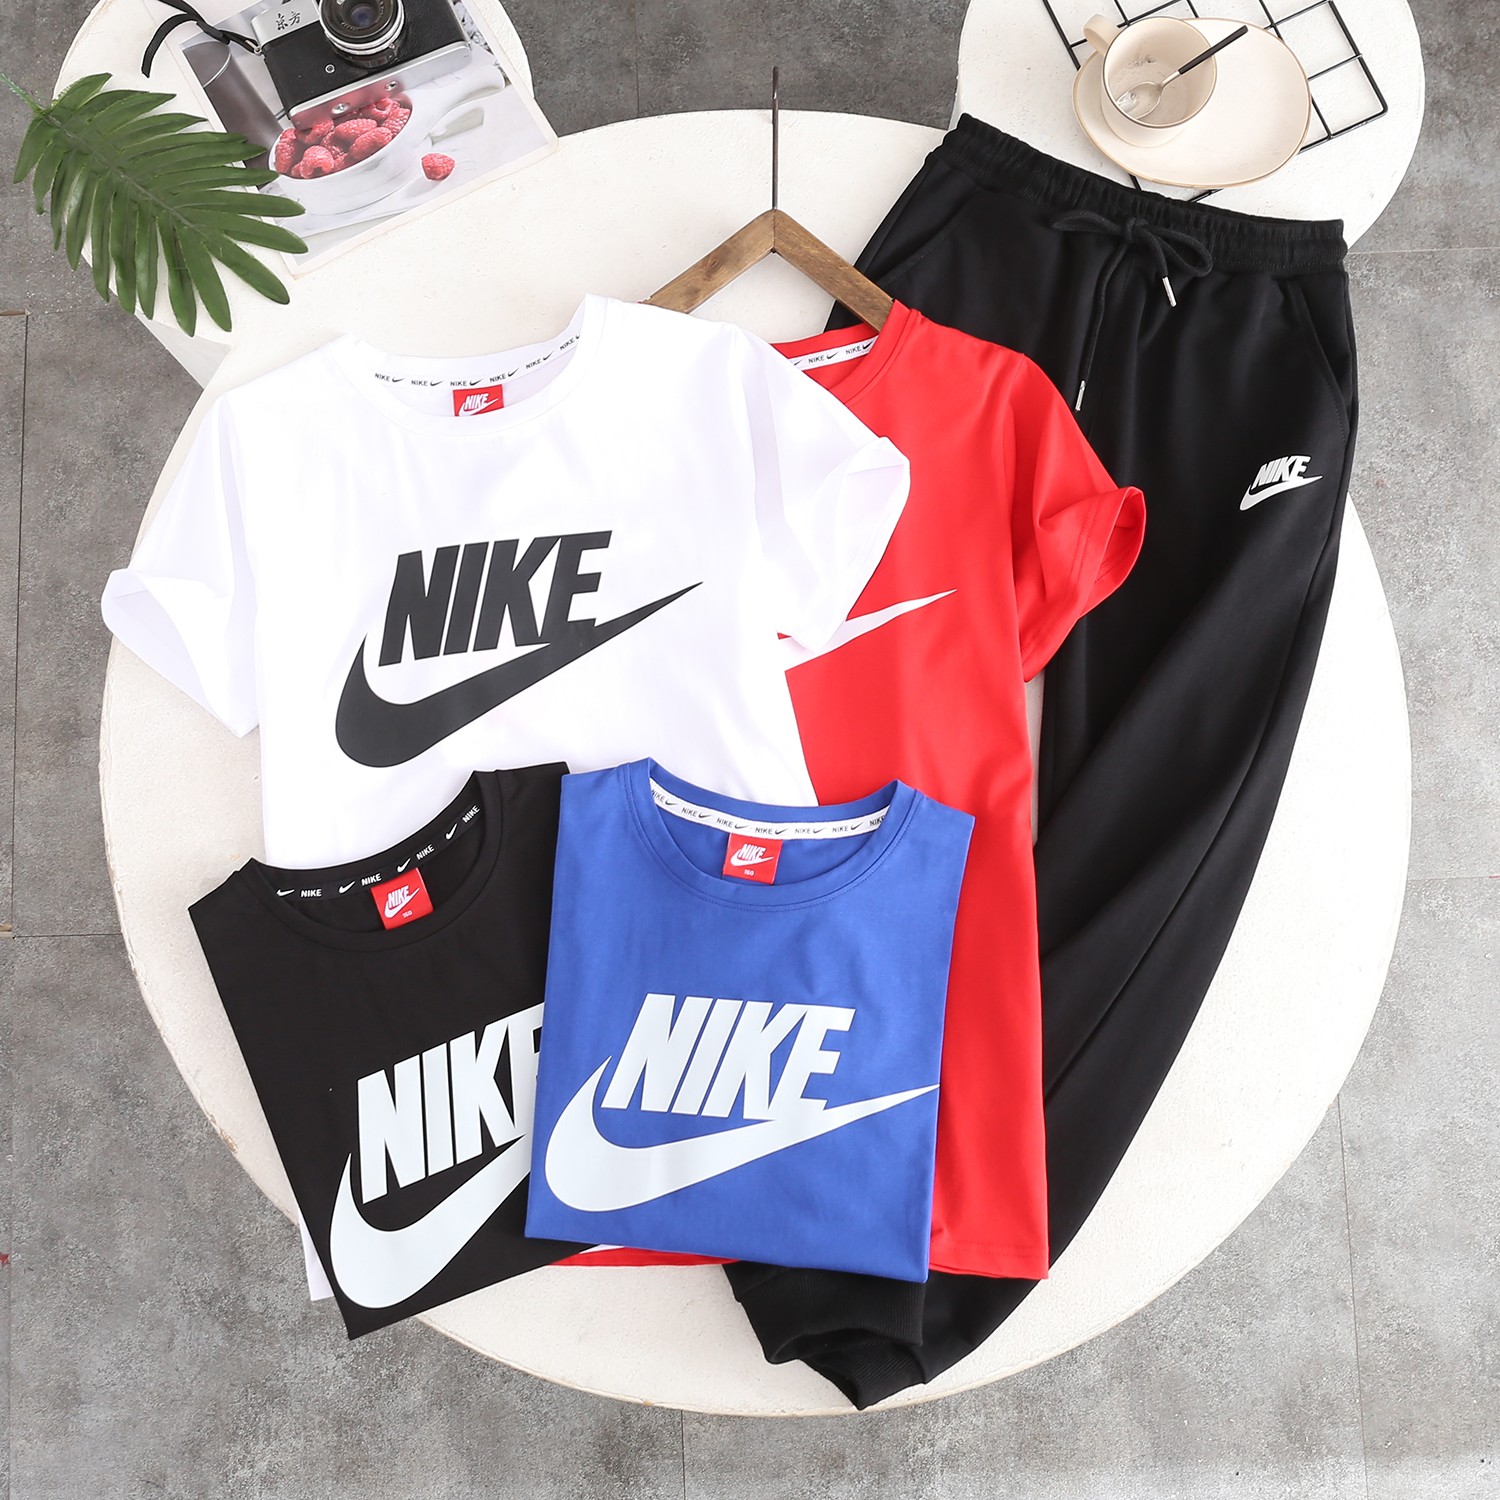 Nike Clothing Pants & Trousers T-Shirt Two Piece Outfits & Matching Sets Black Blue Purple Red White Printing Kids Unisex Cotton Spring/Summer Collection Short Sleeve